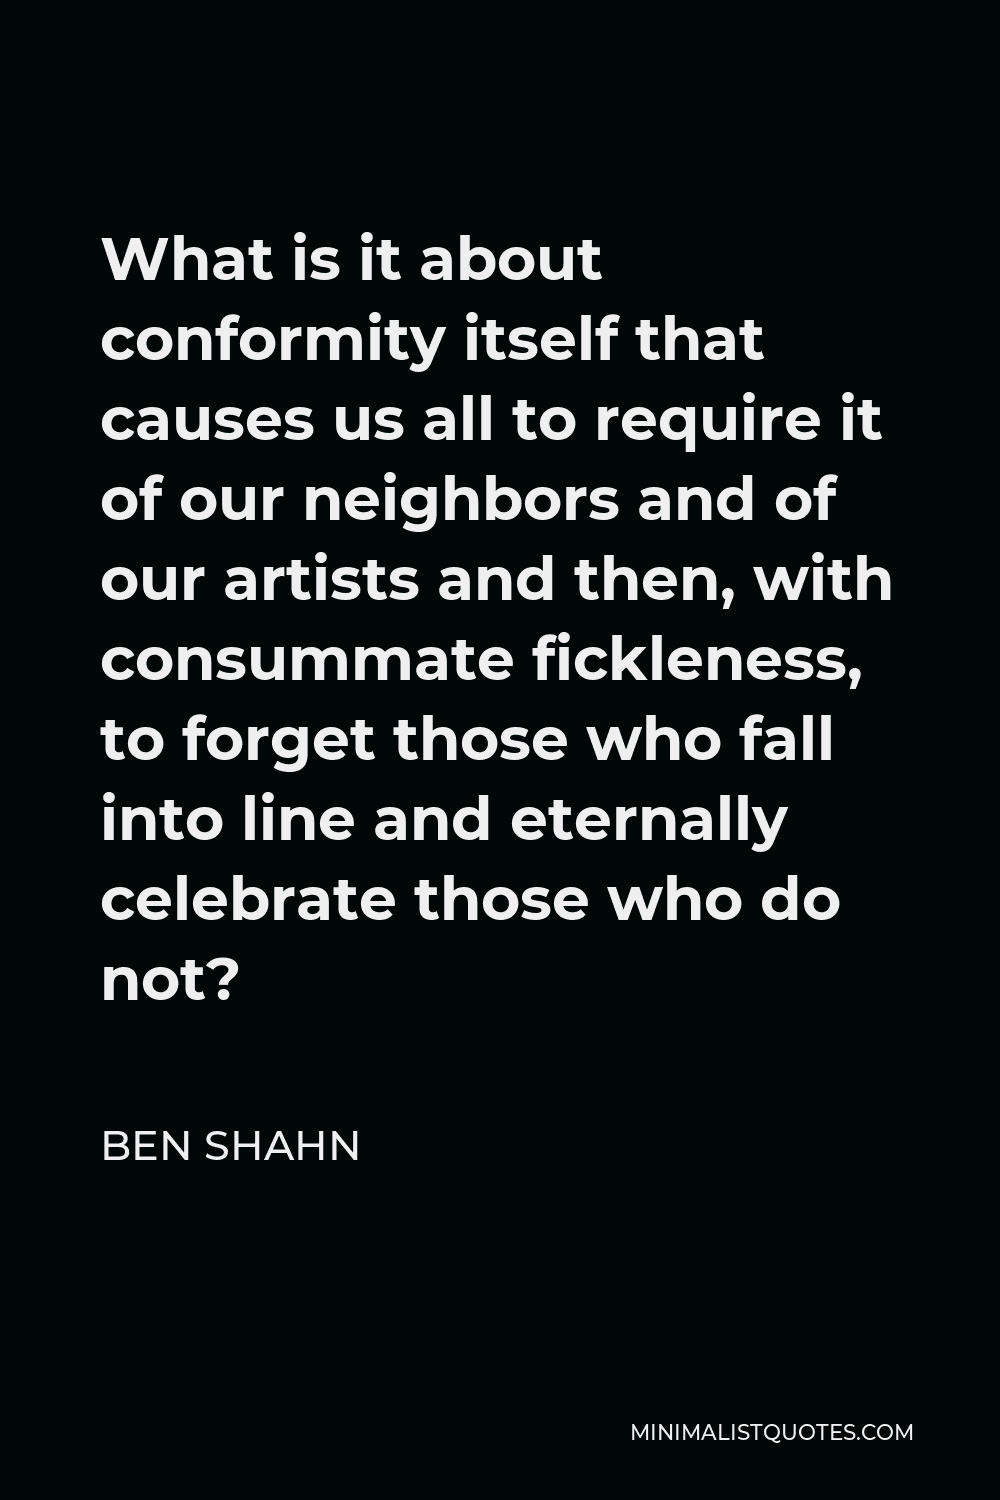 Ben Shahn Quote - What is it about conformity itself that causes us all to require it of our neighbors and of our artists and then, with consummate fickleness, to forget those who fall into line and eternally celebrate those who do not?